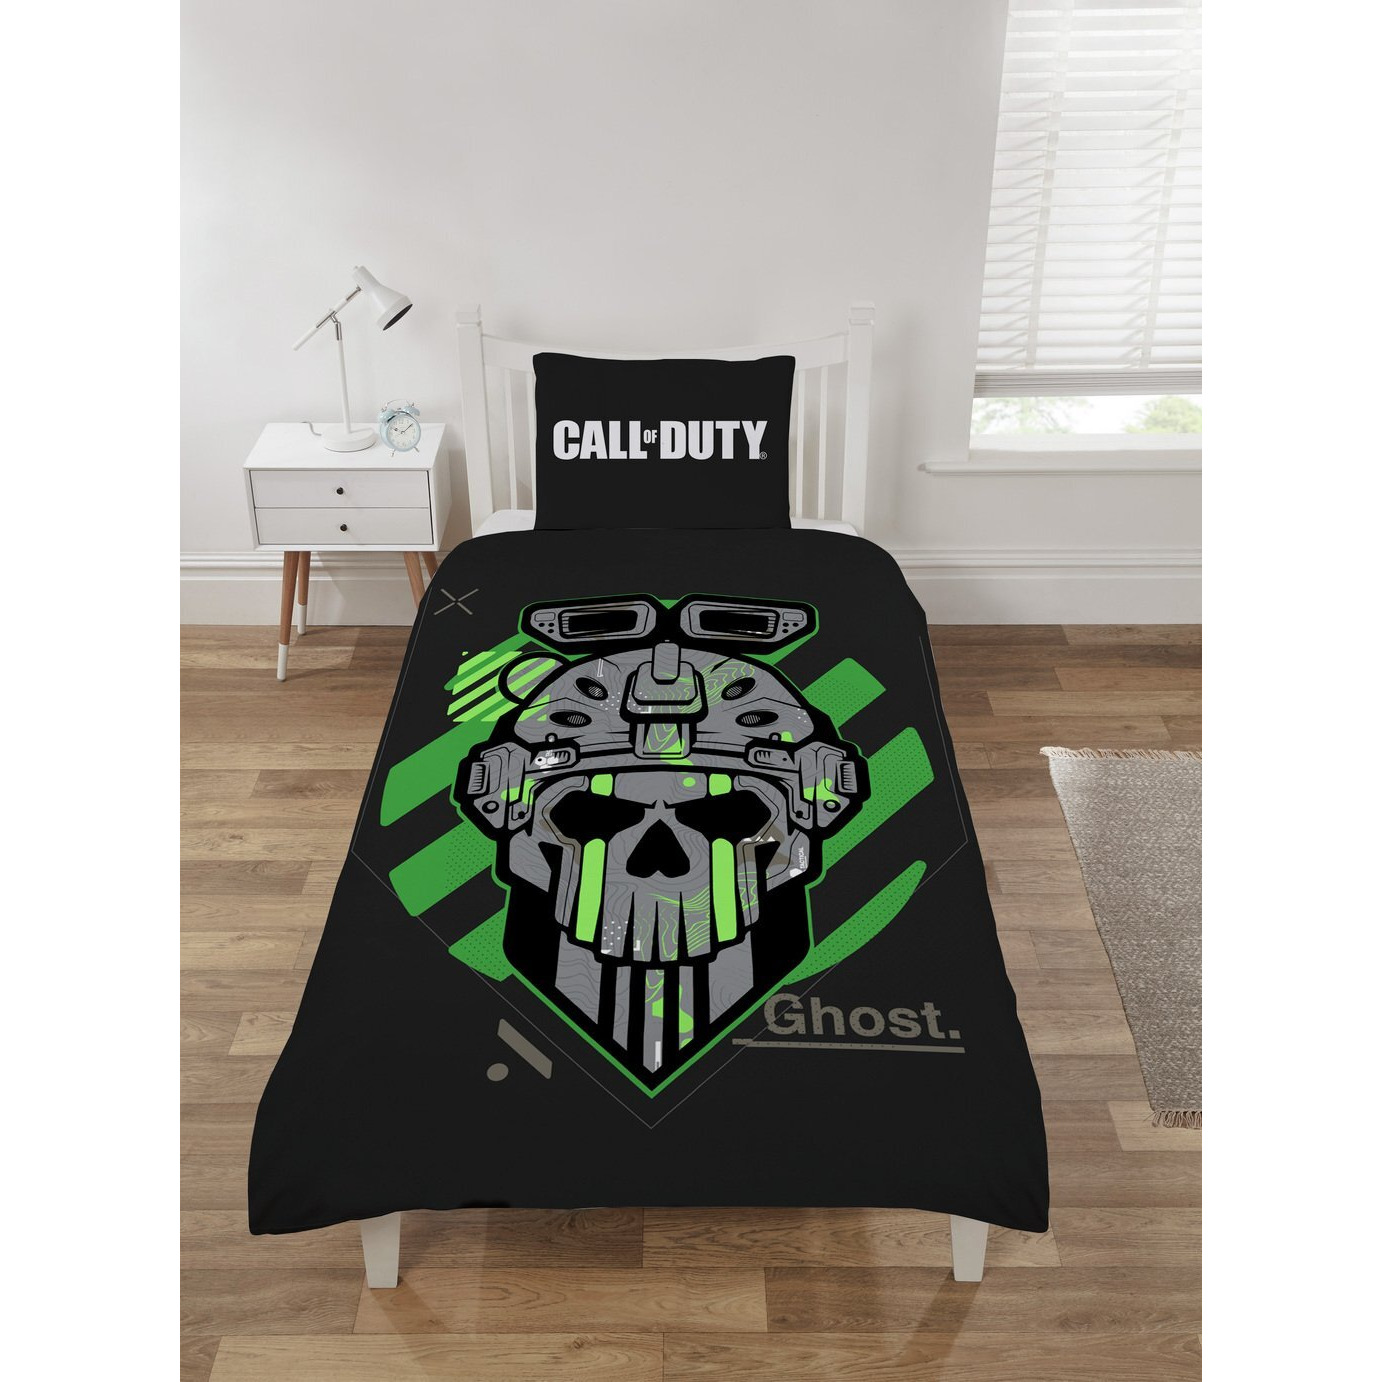 Call of Duty Black and Grey Kids Bedding Set - Single - image 1